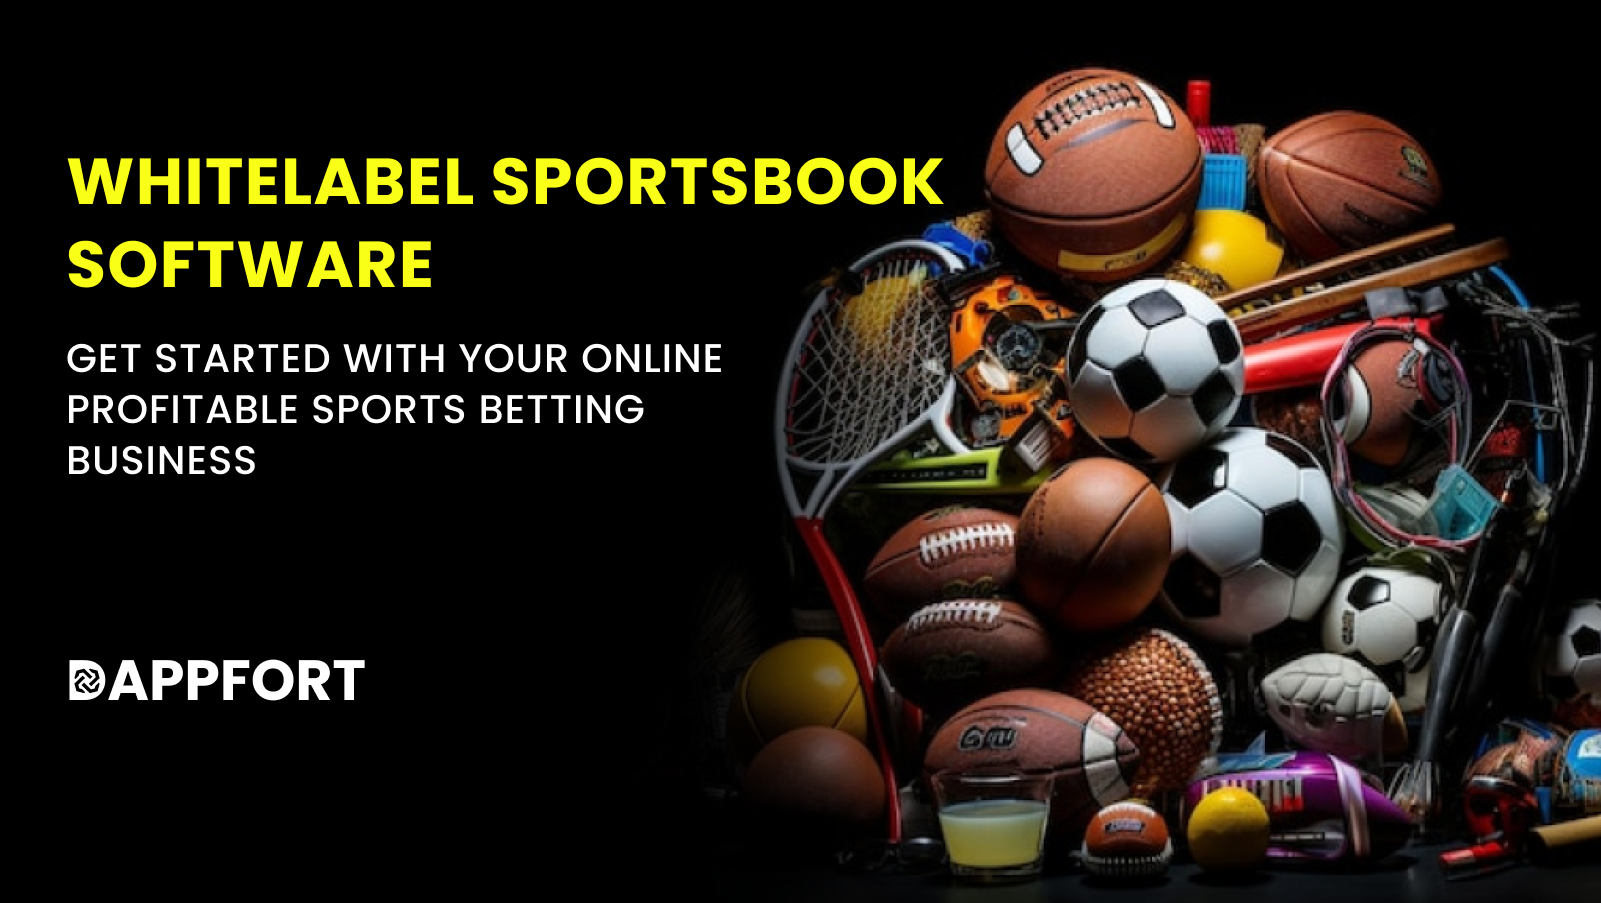 Whitelabel Sportsbook Software: Get Started With Your Online Profitable Sports Betting Business